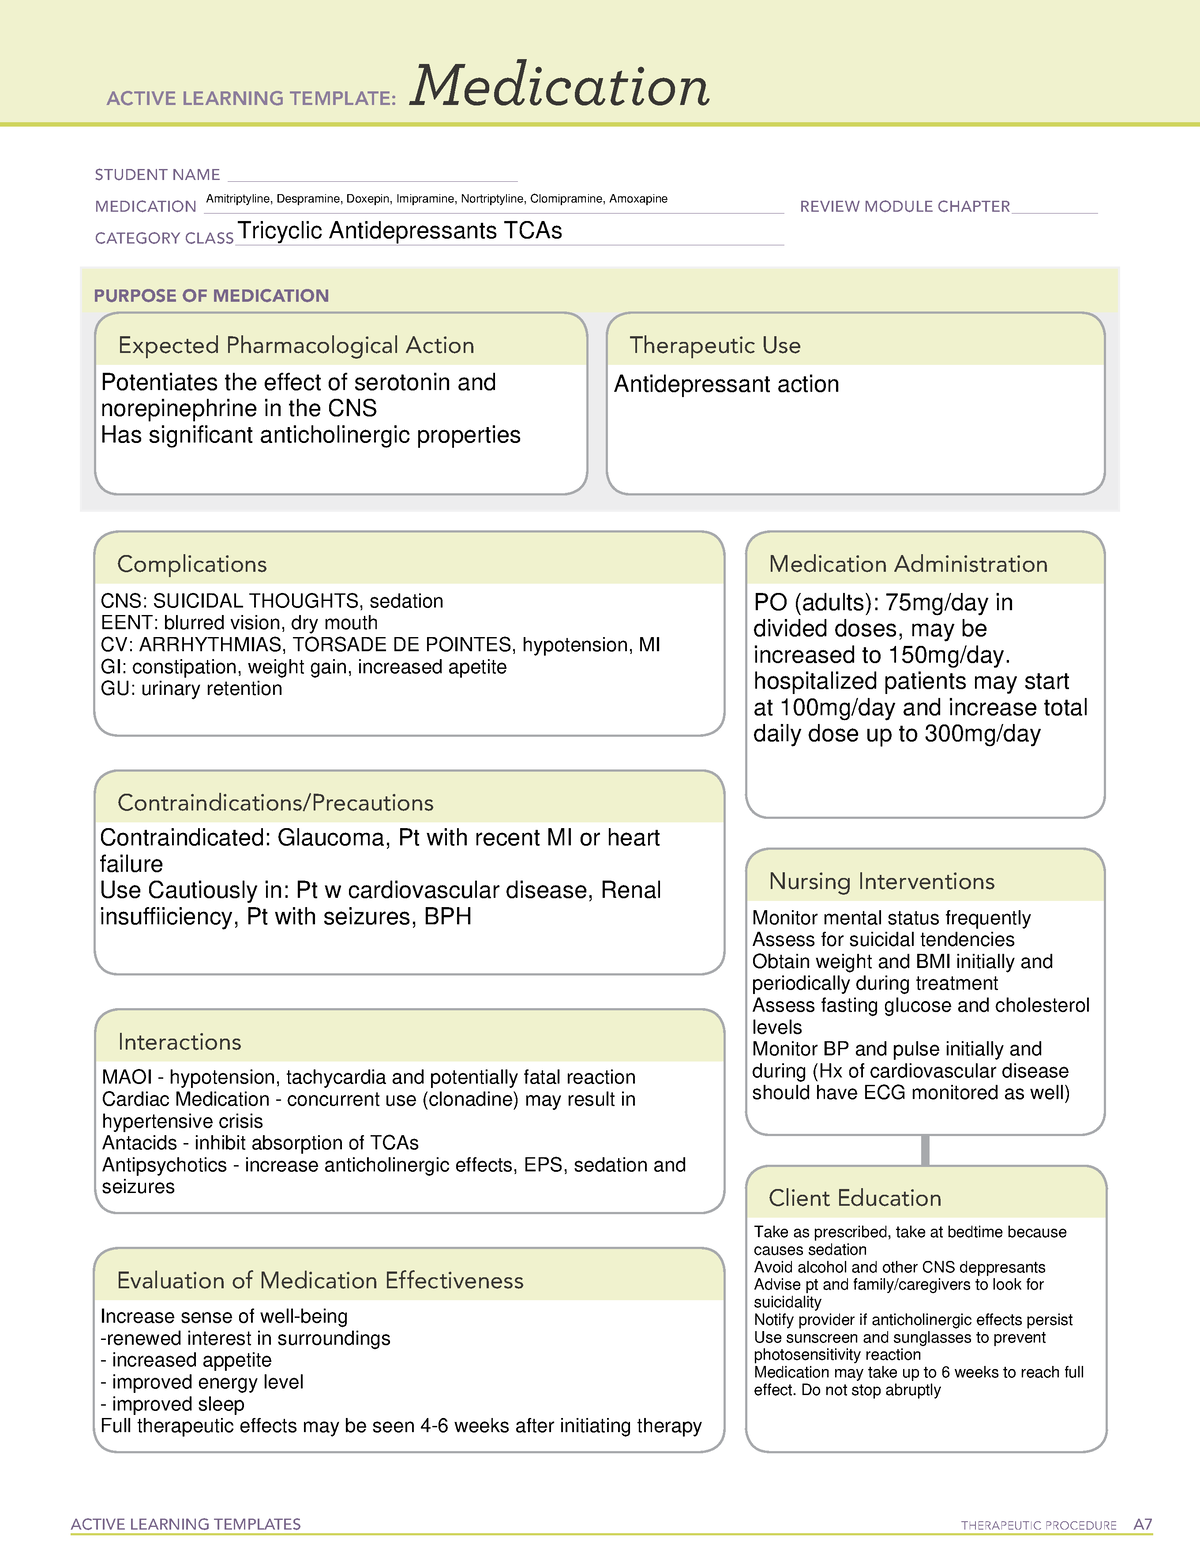 tcas-medication-ati-template-mental-health-active-learning-templates-therapeutic-procedure-a